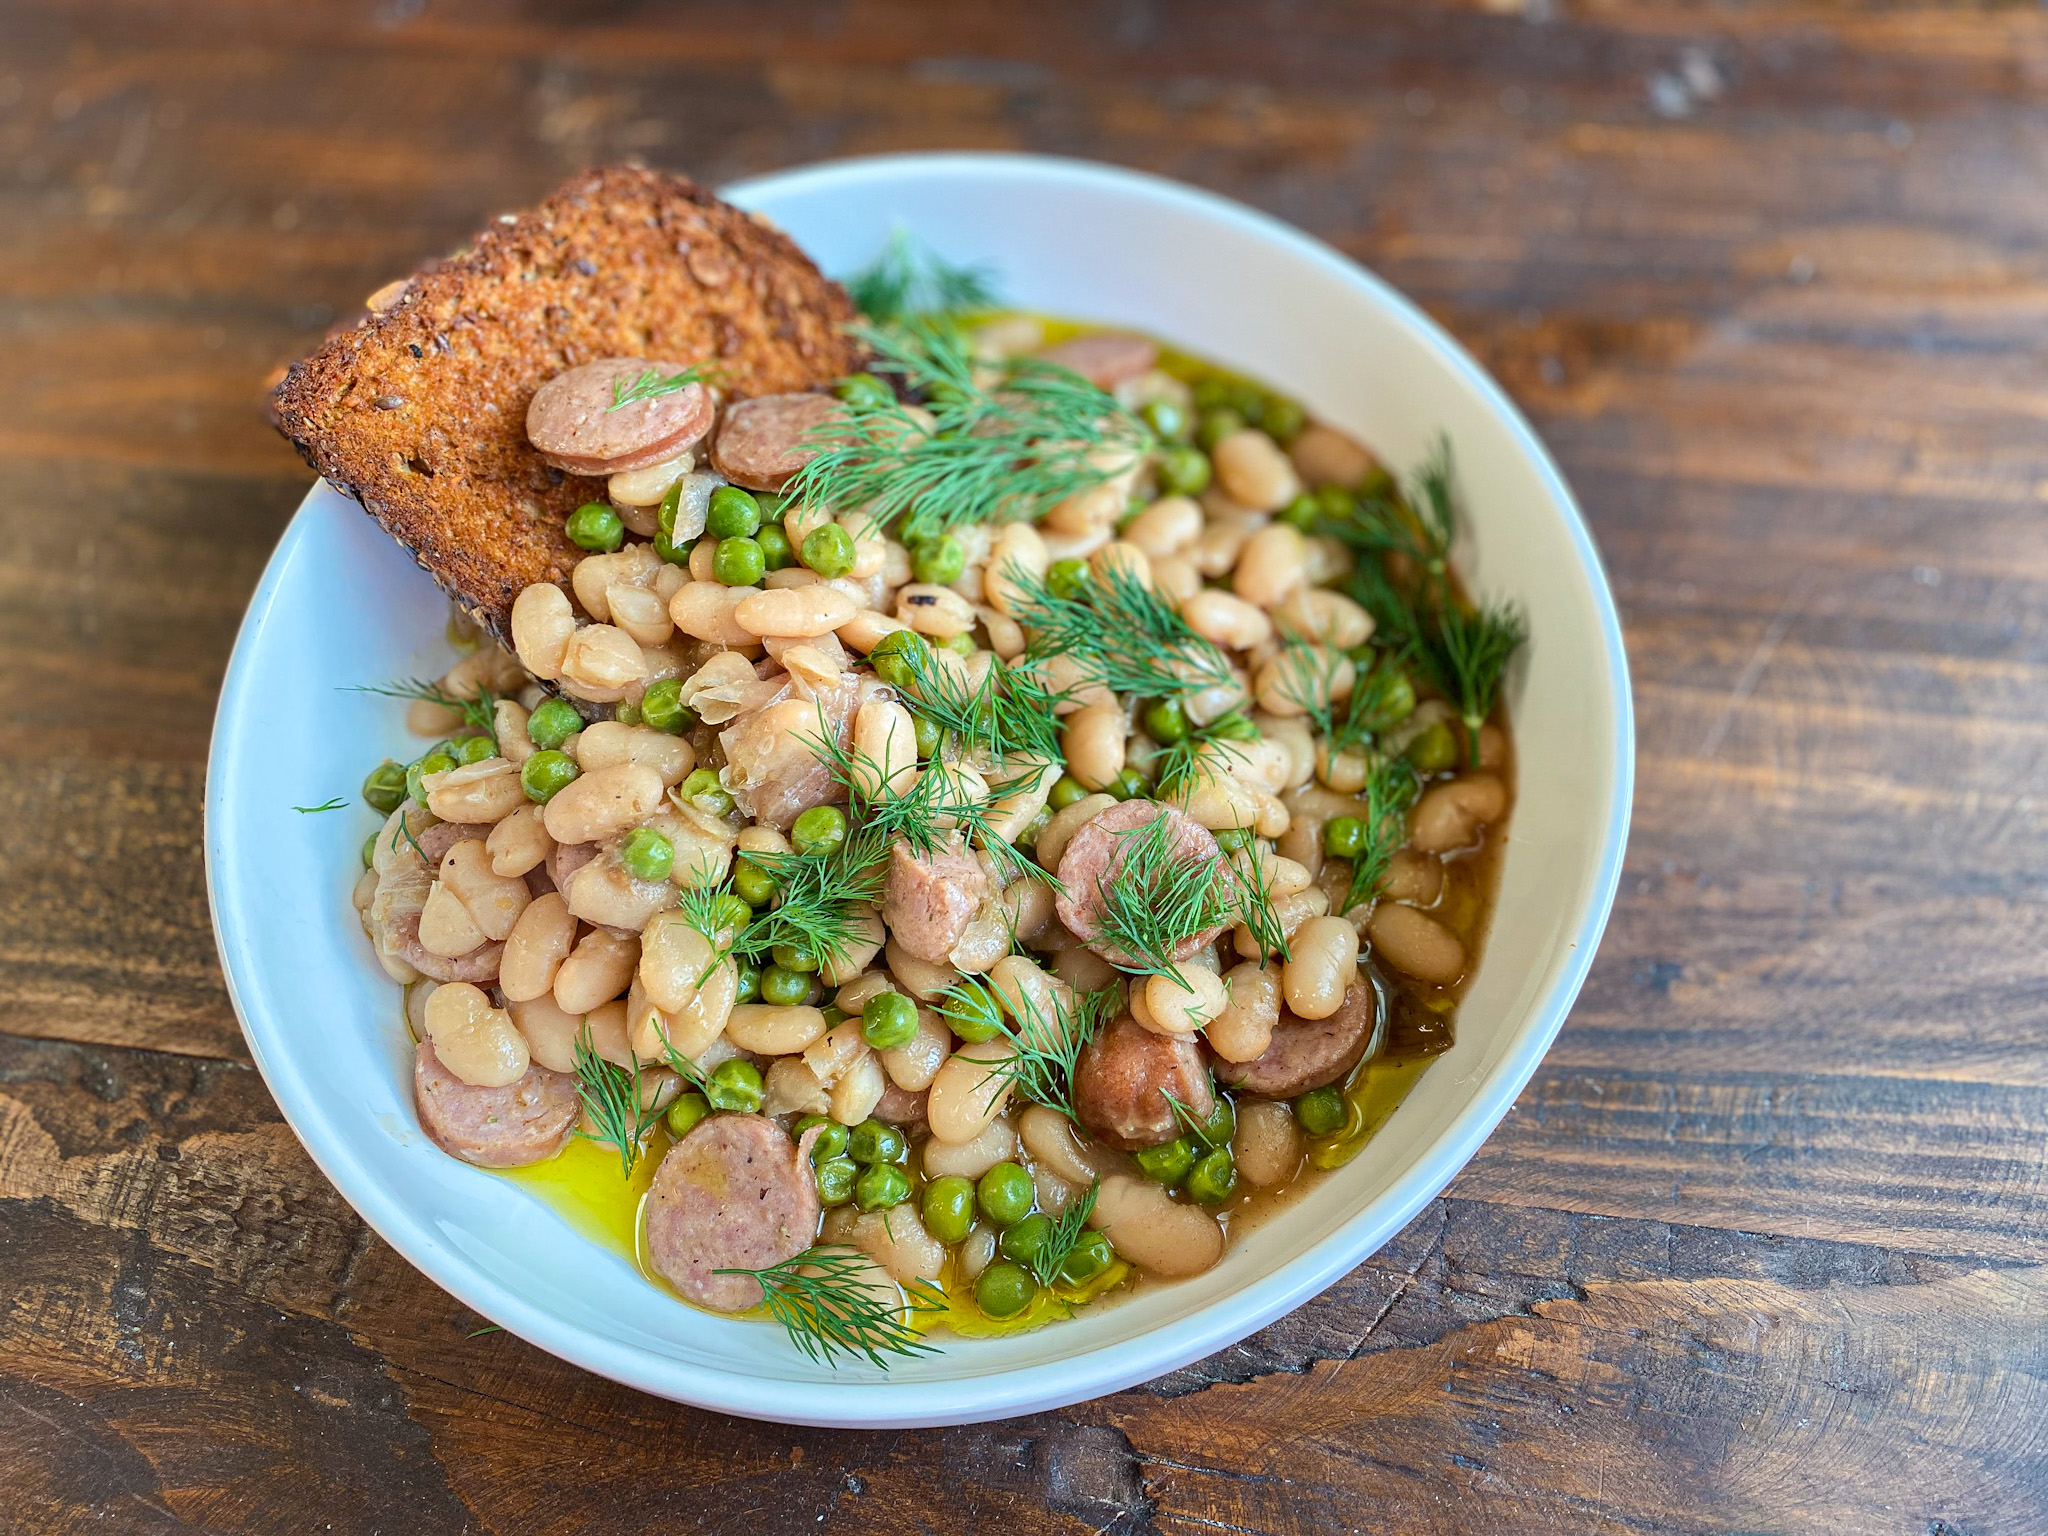 Dashi beans with sausage and Dave's Killer bread